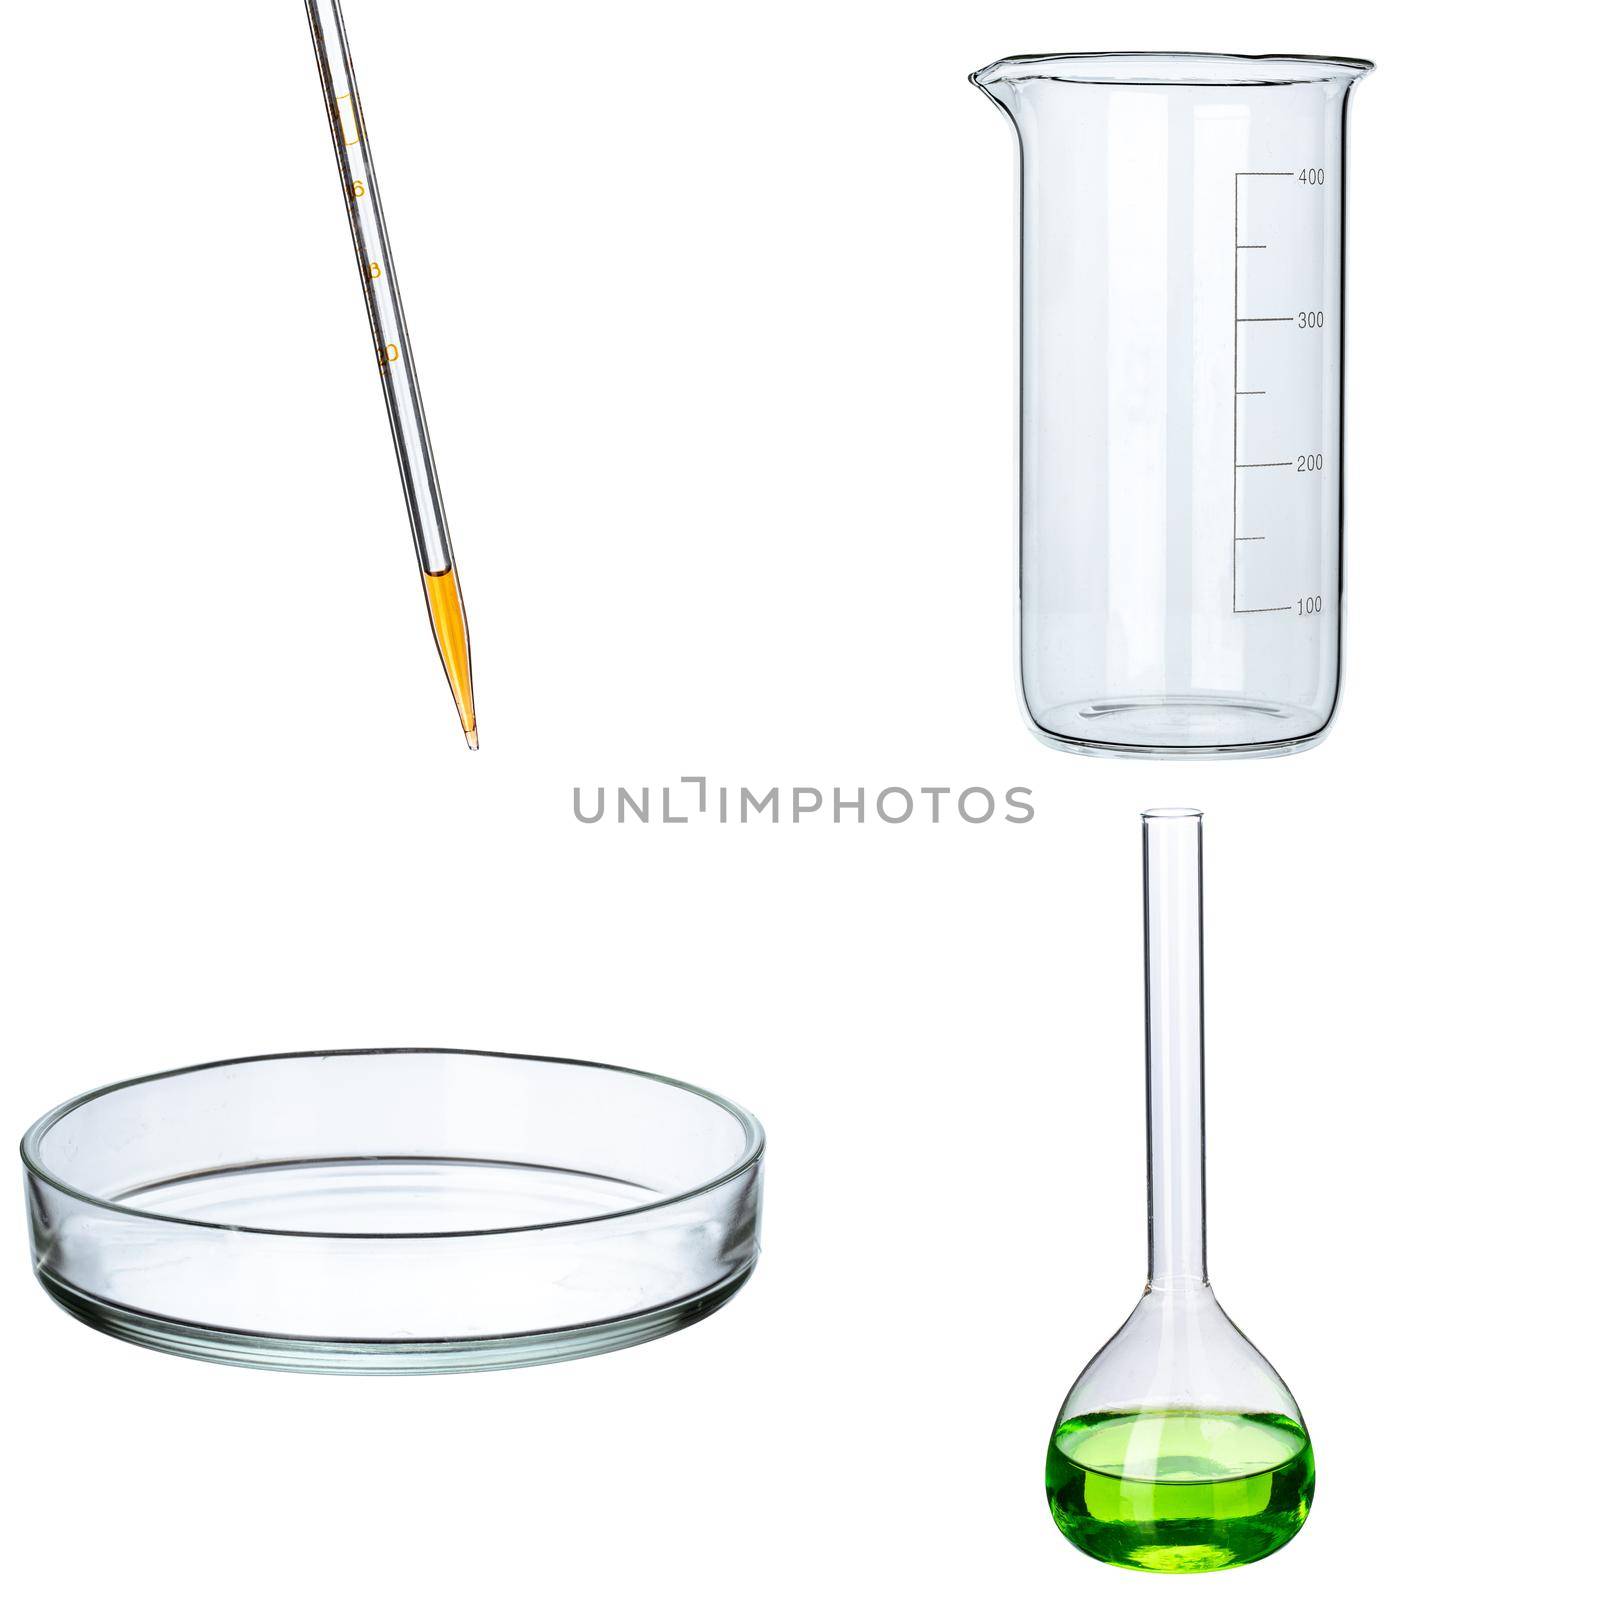 Collage of laboratory glassware on white background by Fabrikasimf